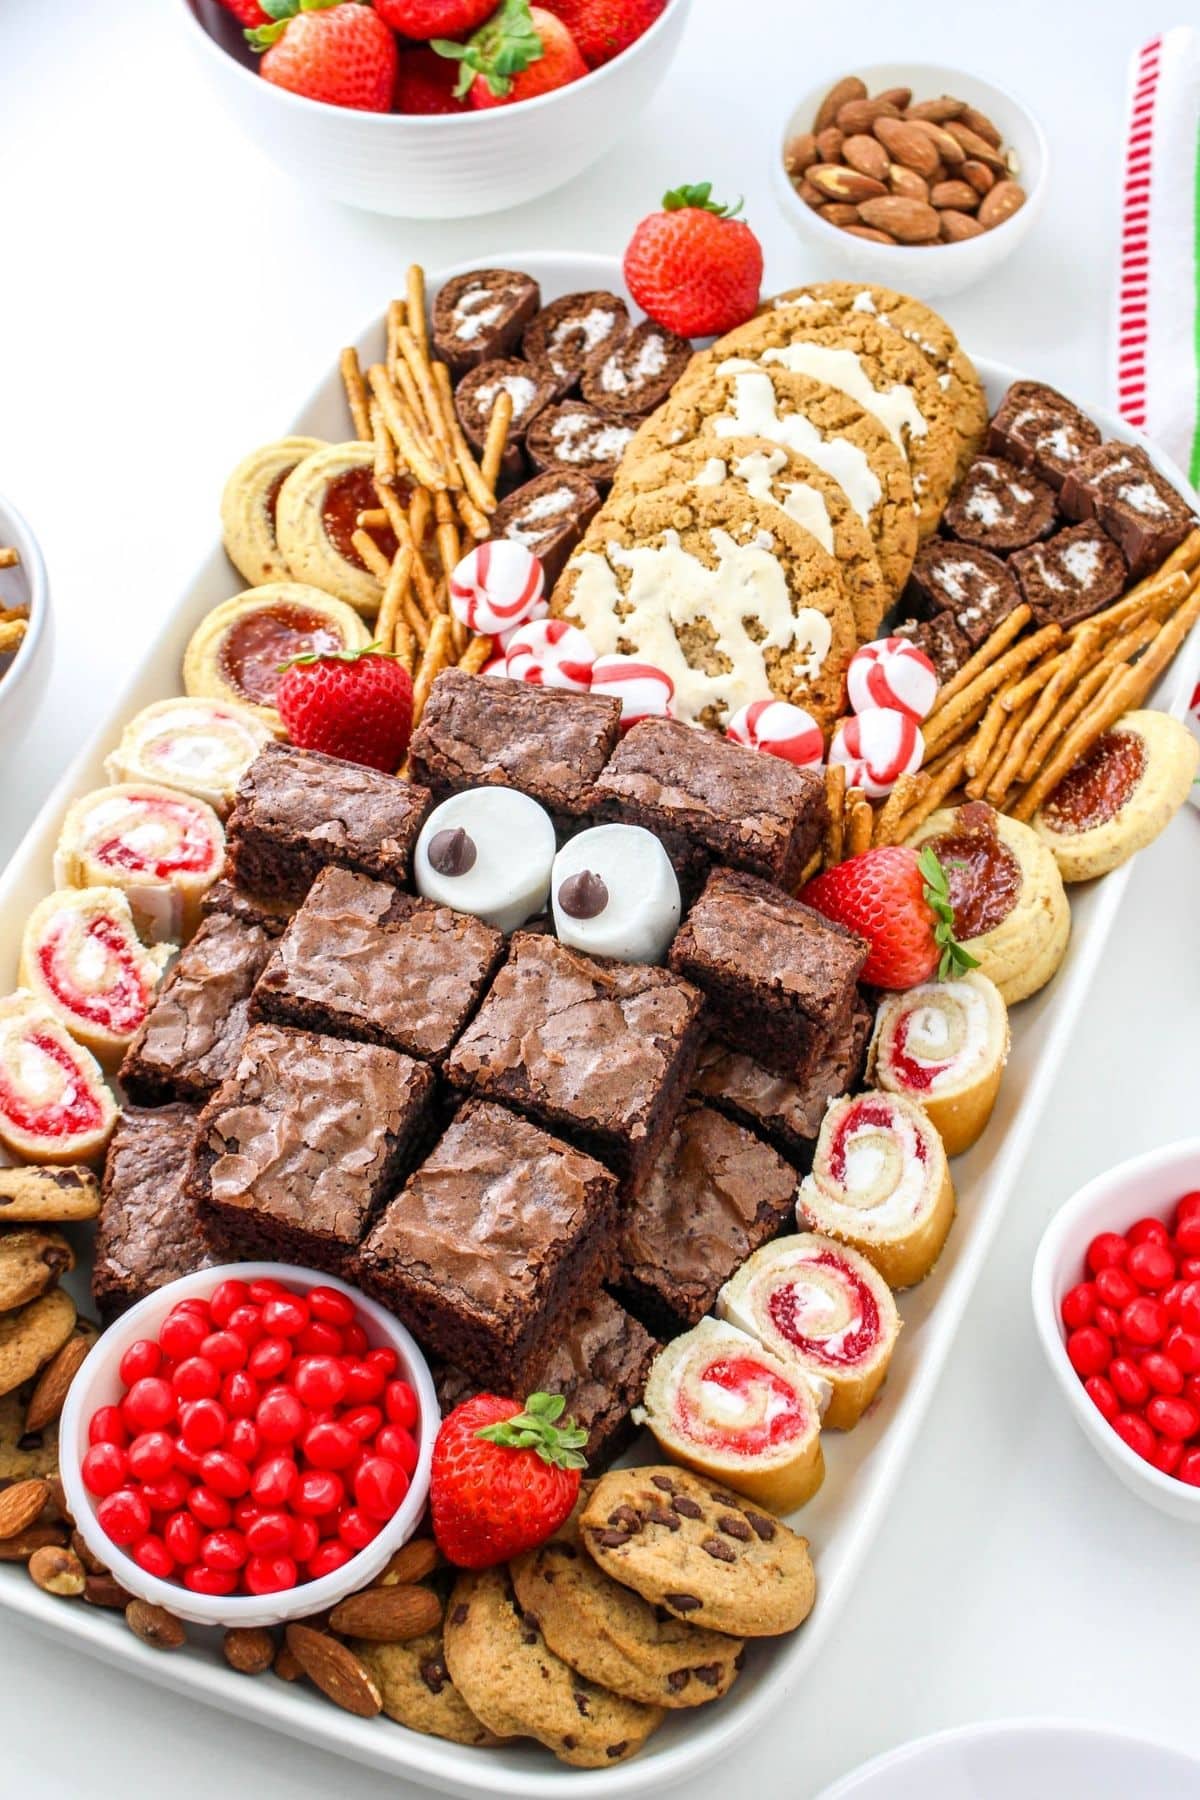 A dessert platter with brownies, cookies, and candies.